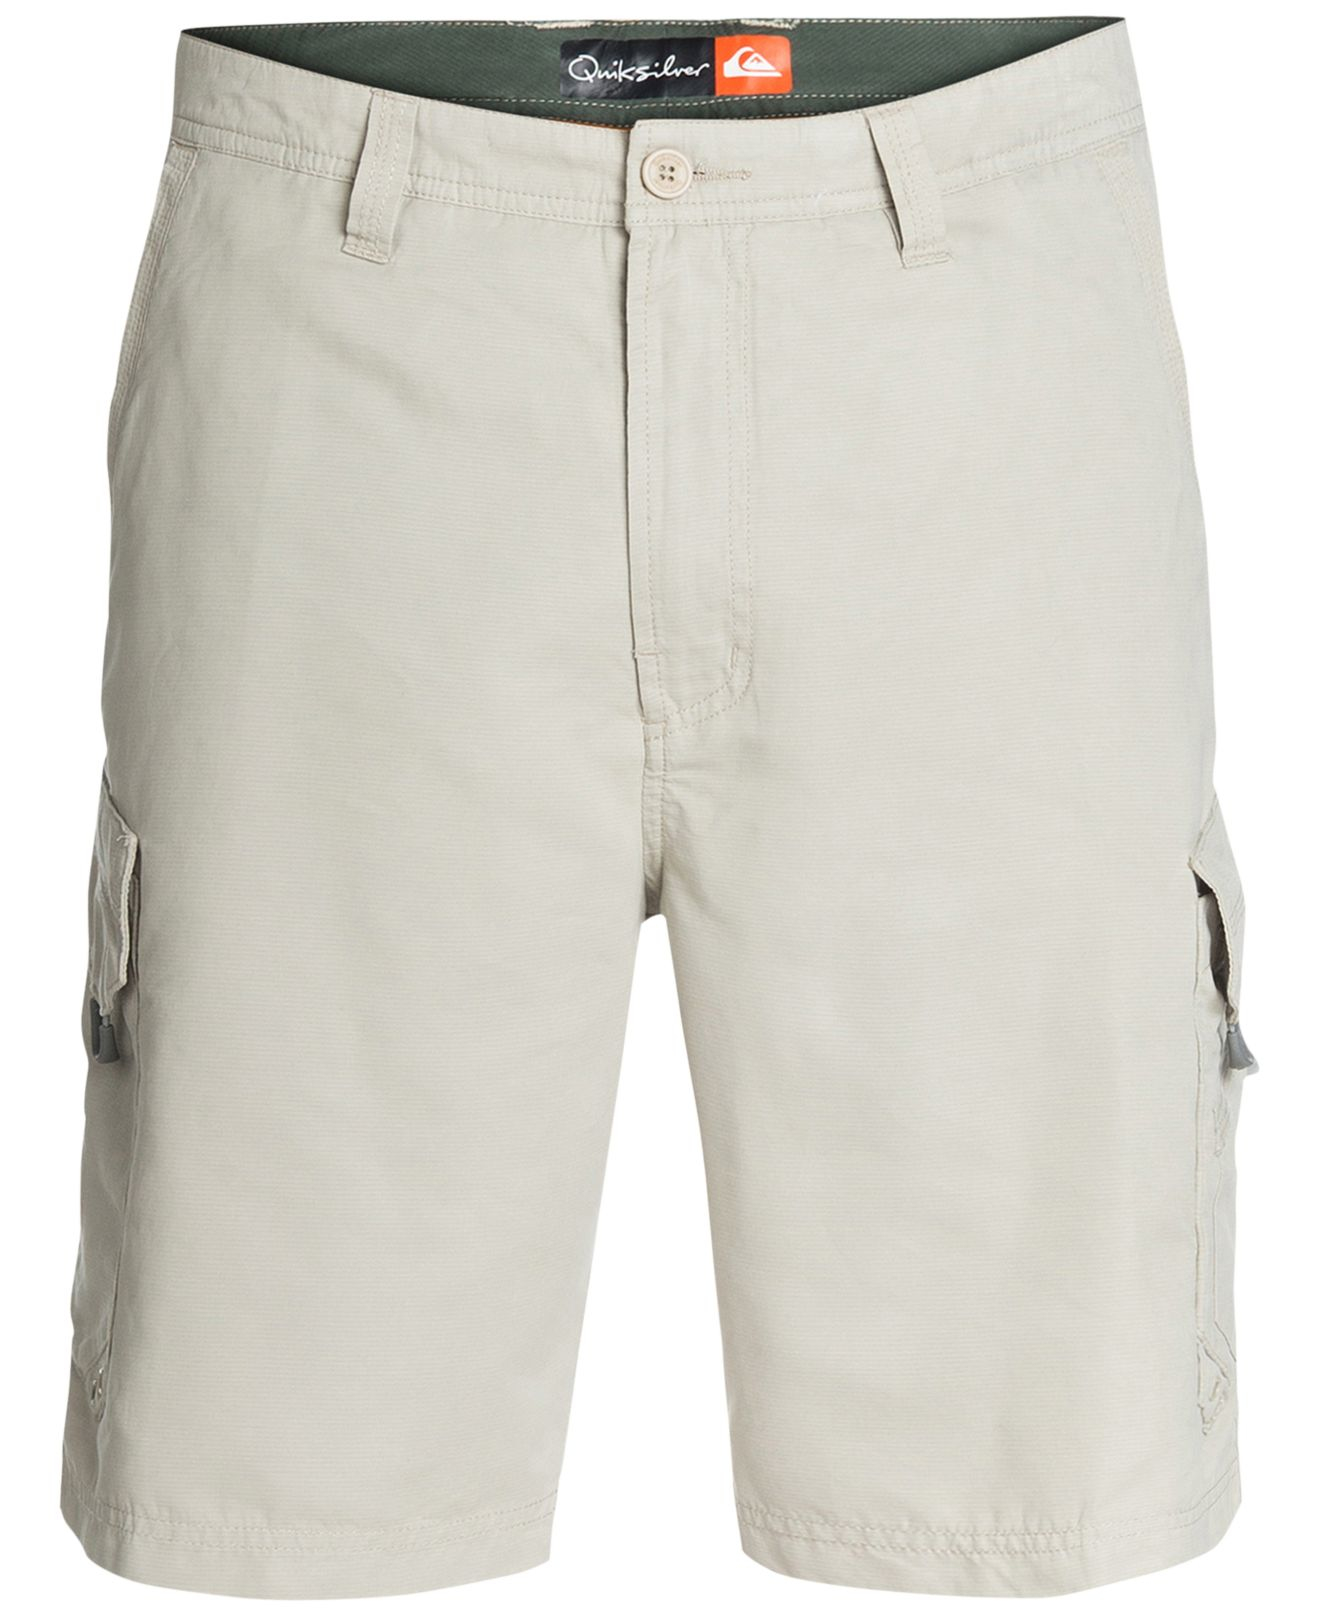 Lyst - Quiksilver Maldive Cargo Shorts in Gray for Men